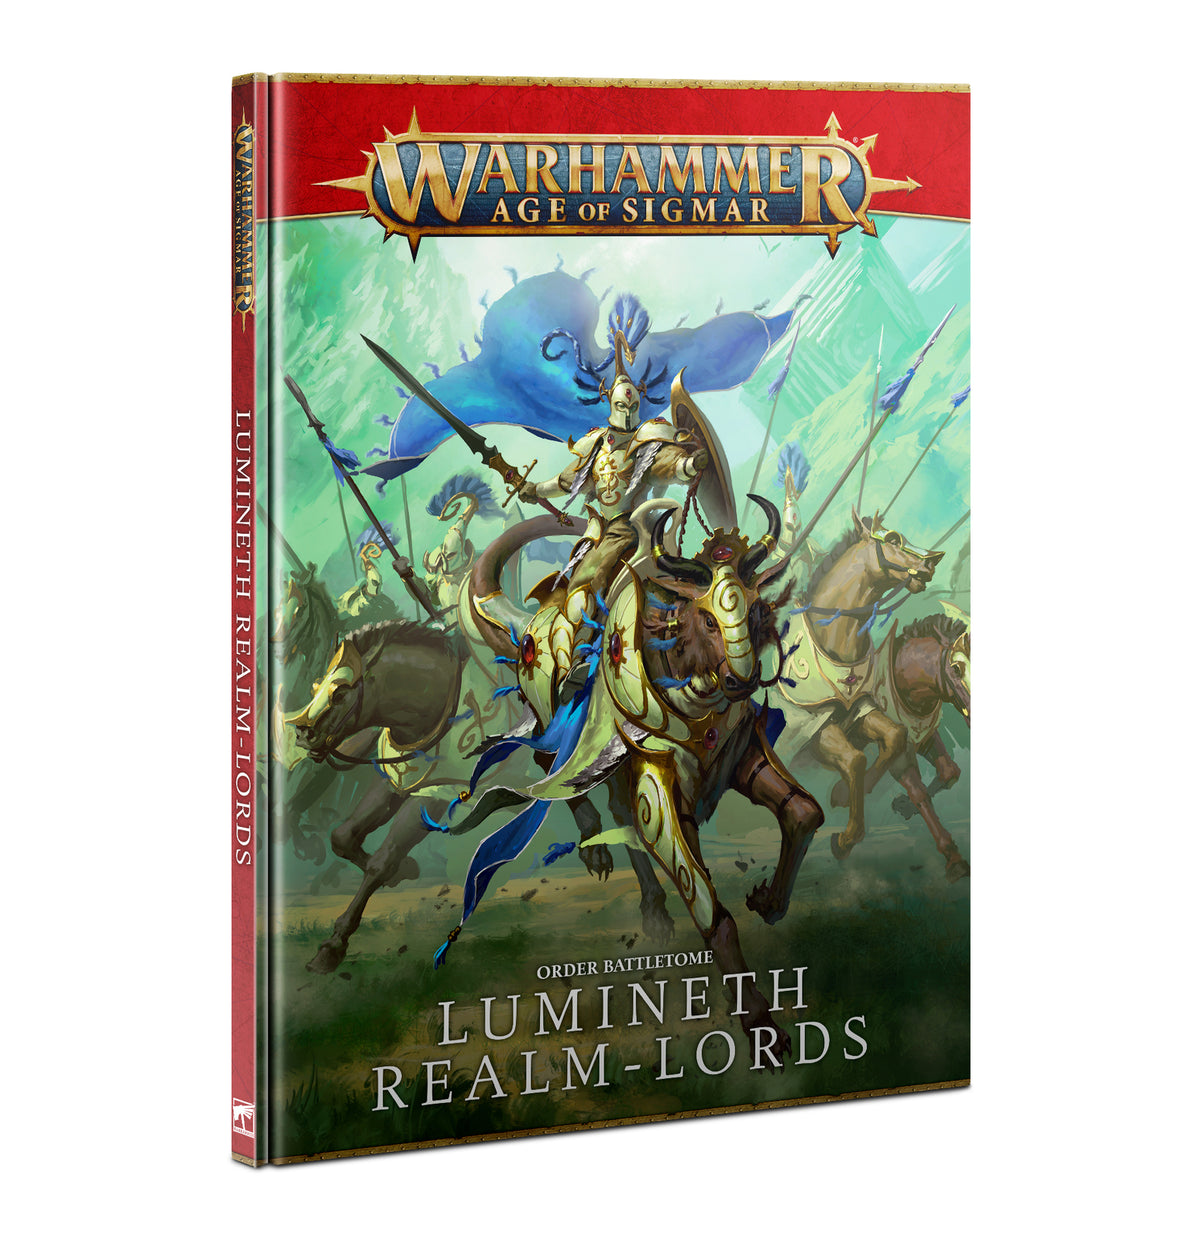 Order Battletome: Lumineth Realm-Lords (87-04)